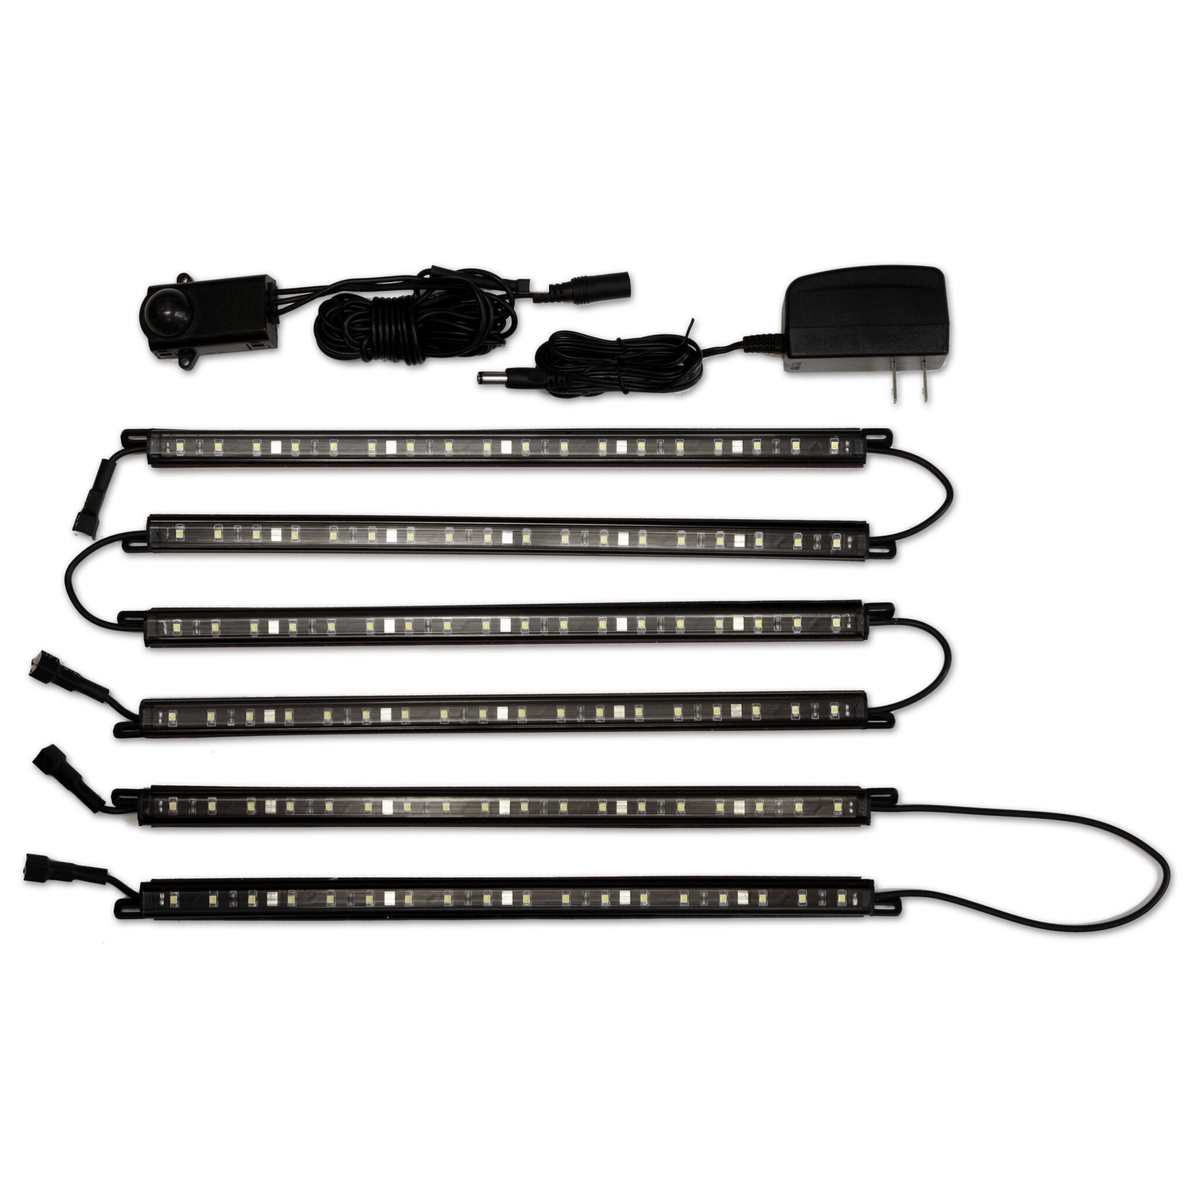 Accessory - Lights - Clearview Safe Light Kits | Liberty Safe Norcal.